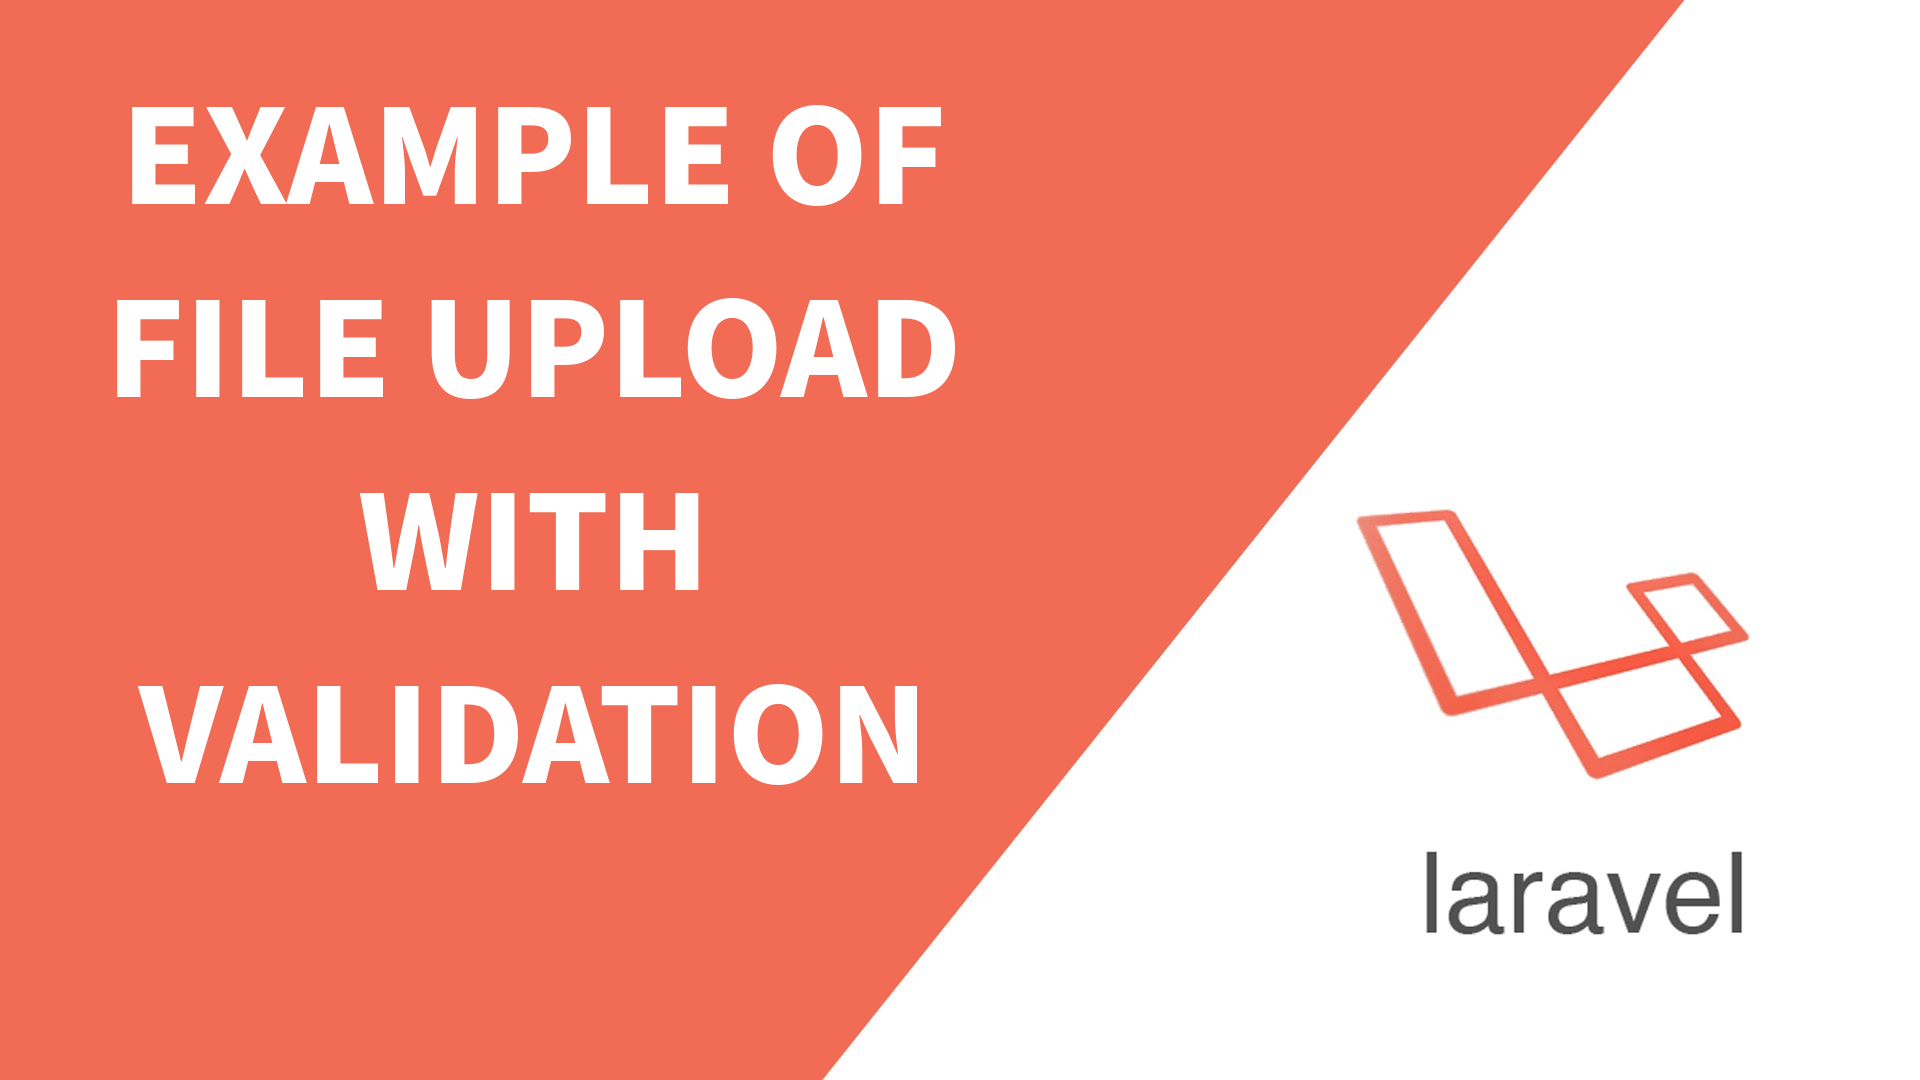 Example of File Upload with Validation in Laravel 5.6